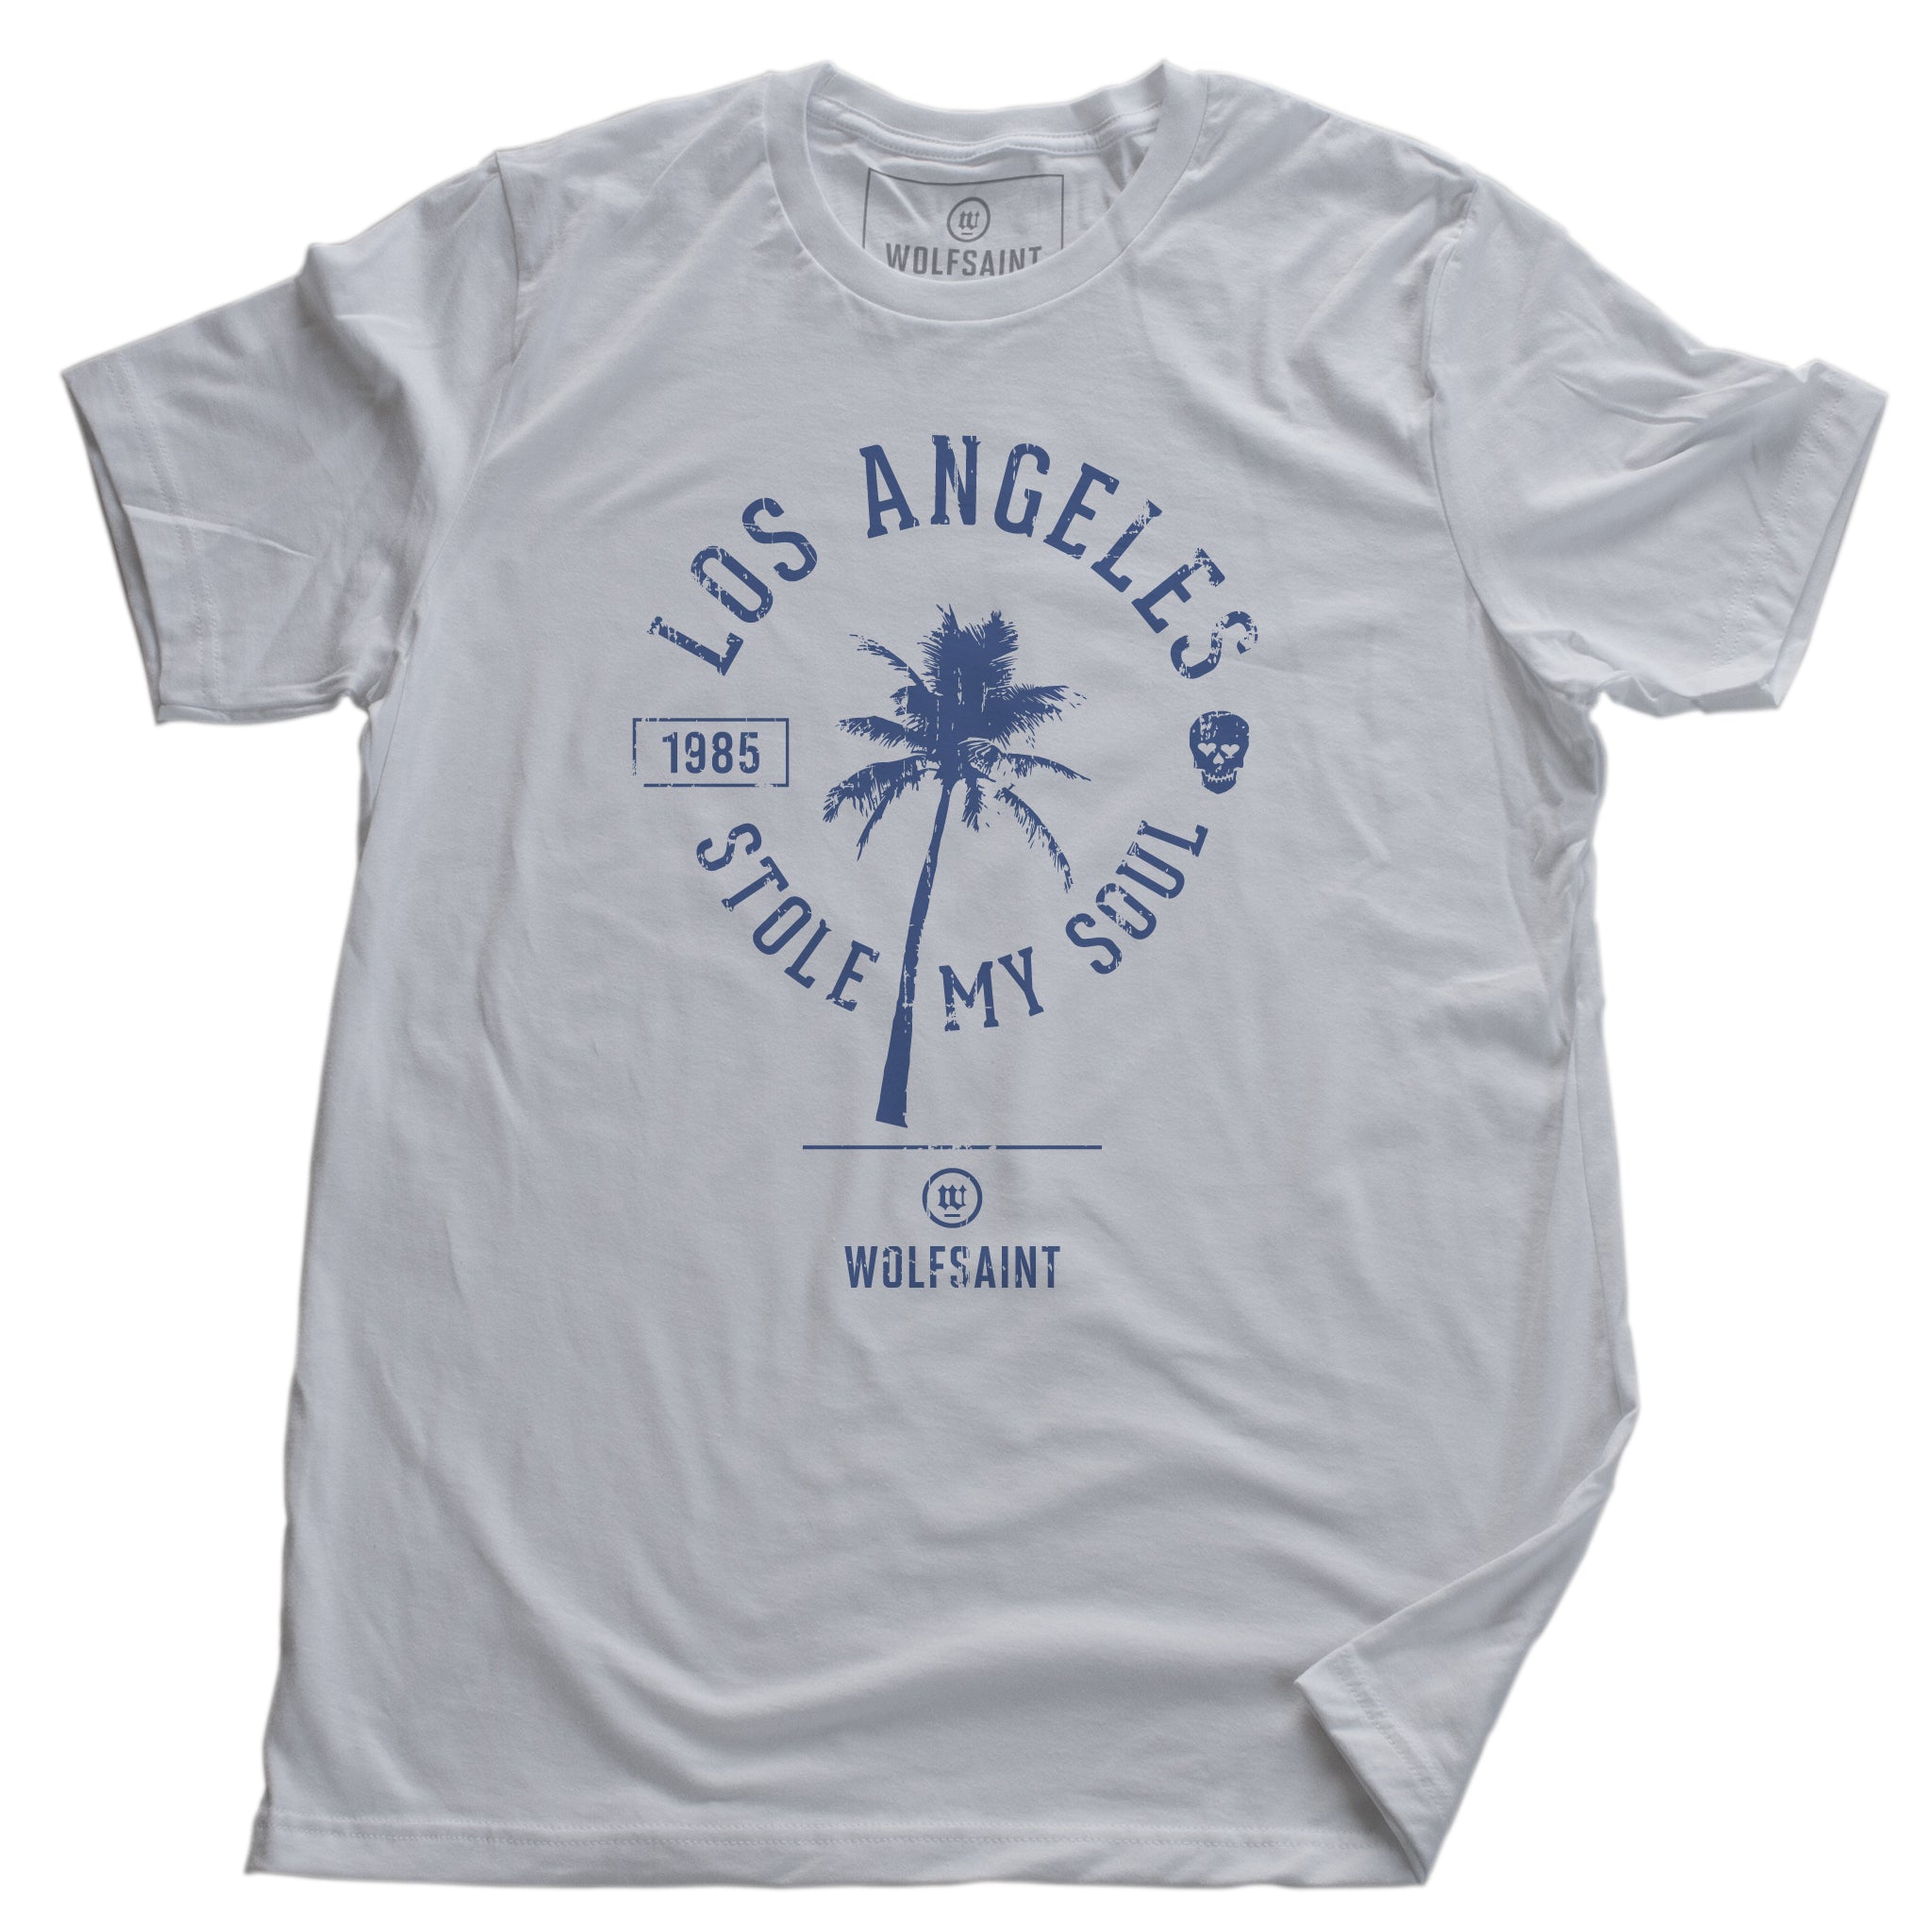 A fashionable retro graphic t-shirt in white, featuring a palm tree surrounded by the sarcastic words “Los Angeles Stole My Soul” with the year 1985 and a fun skull icon. From wolfsaint.net